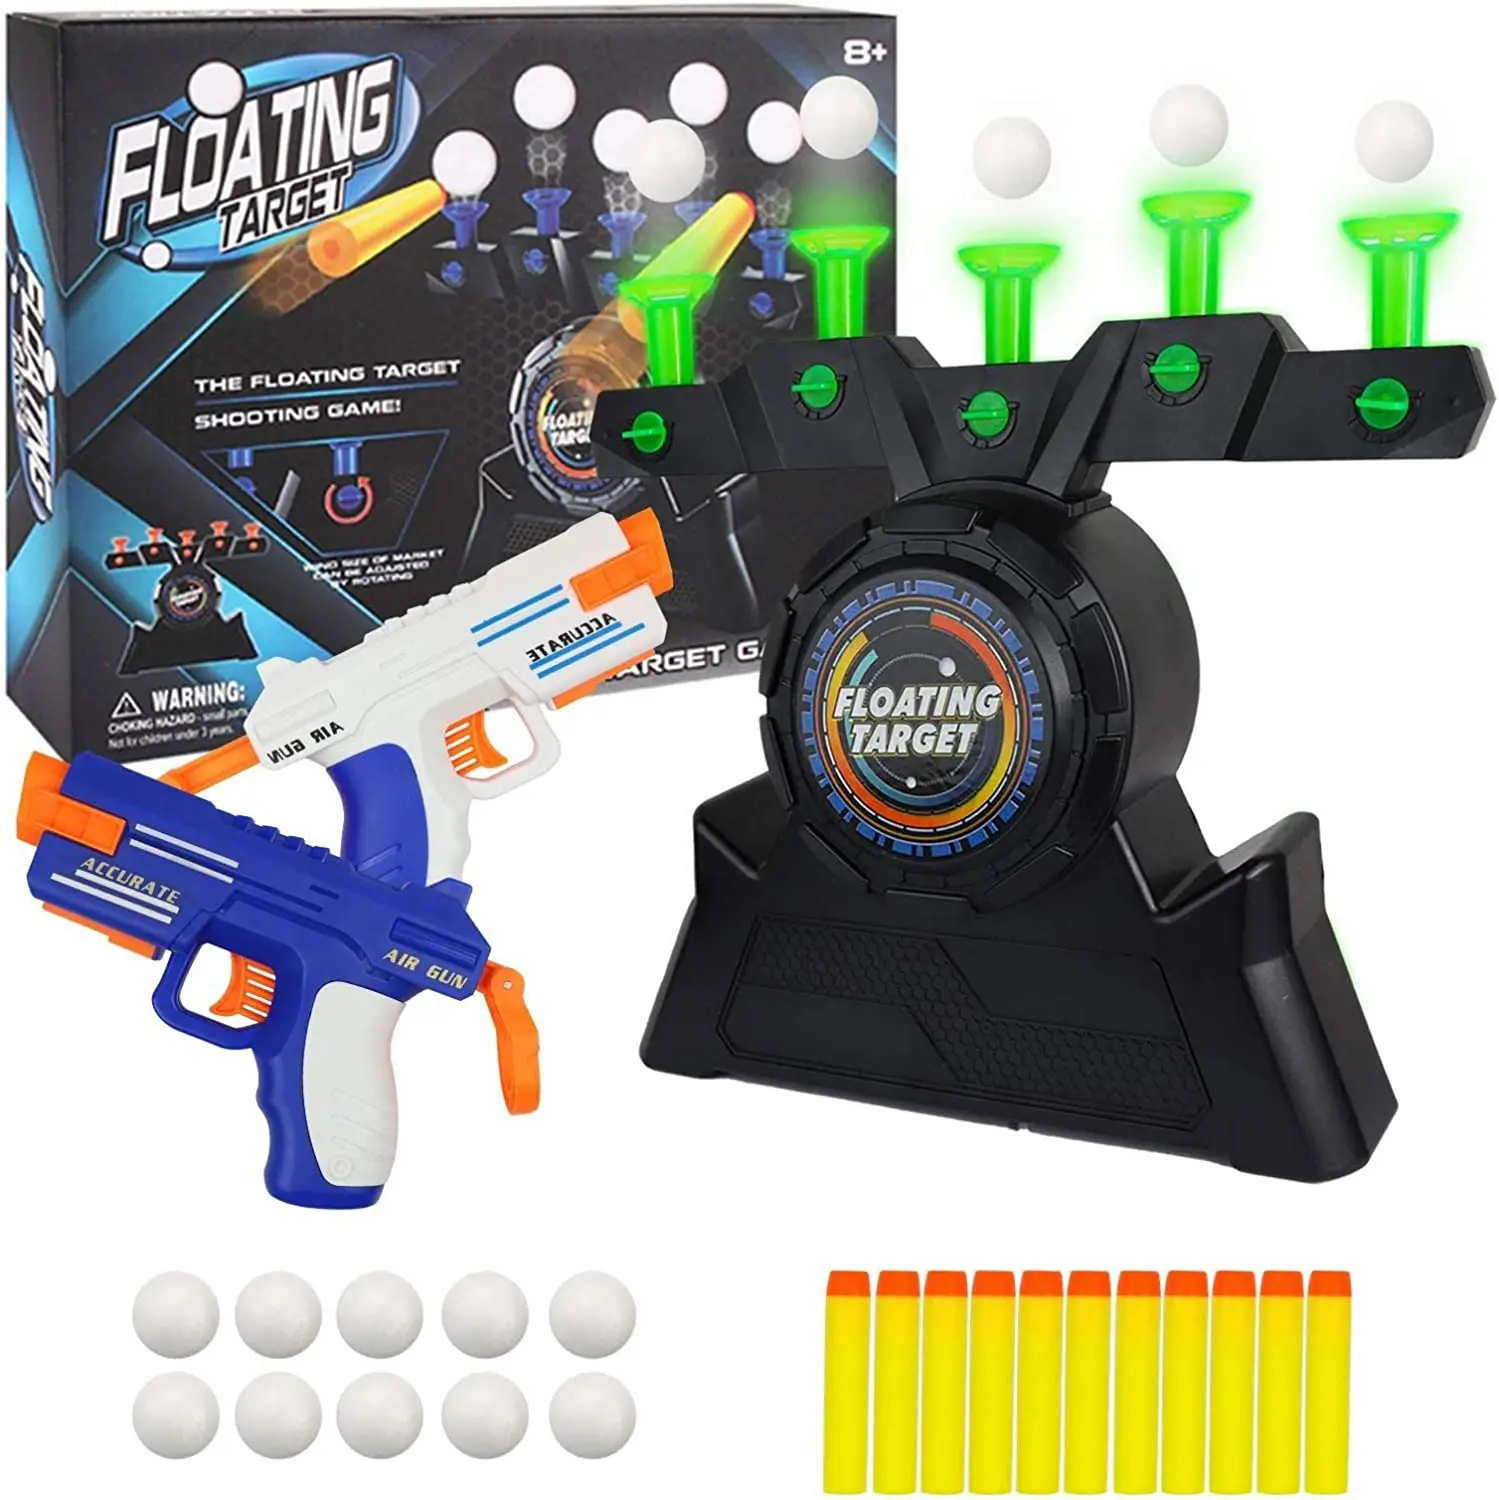 

Hover Shooting Games Toy for Kids Compatible Floating Ball Targets with Soft Foam Bullets Cool Birthday Gift Toys for Boys Girls